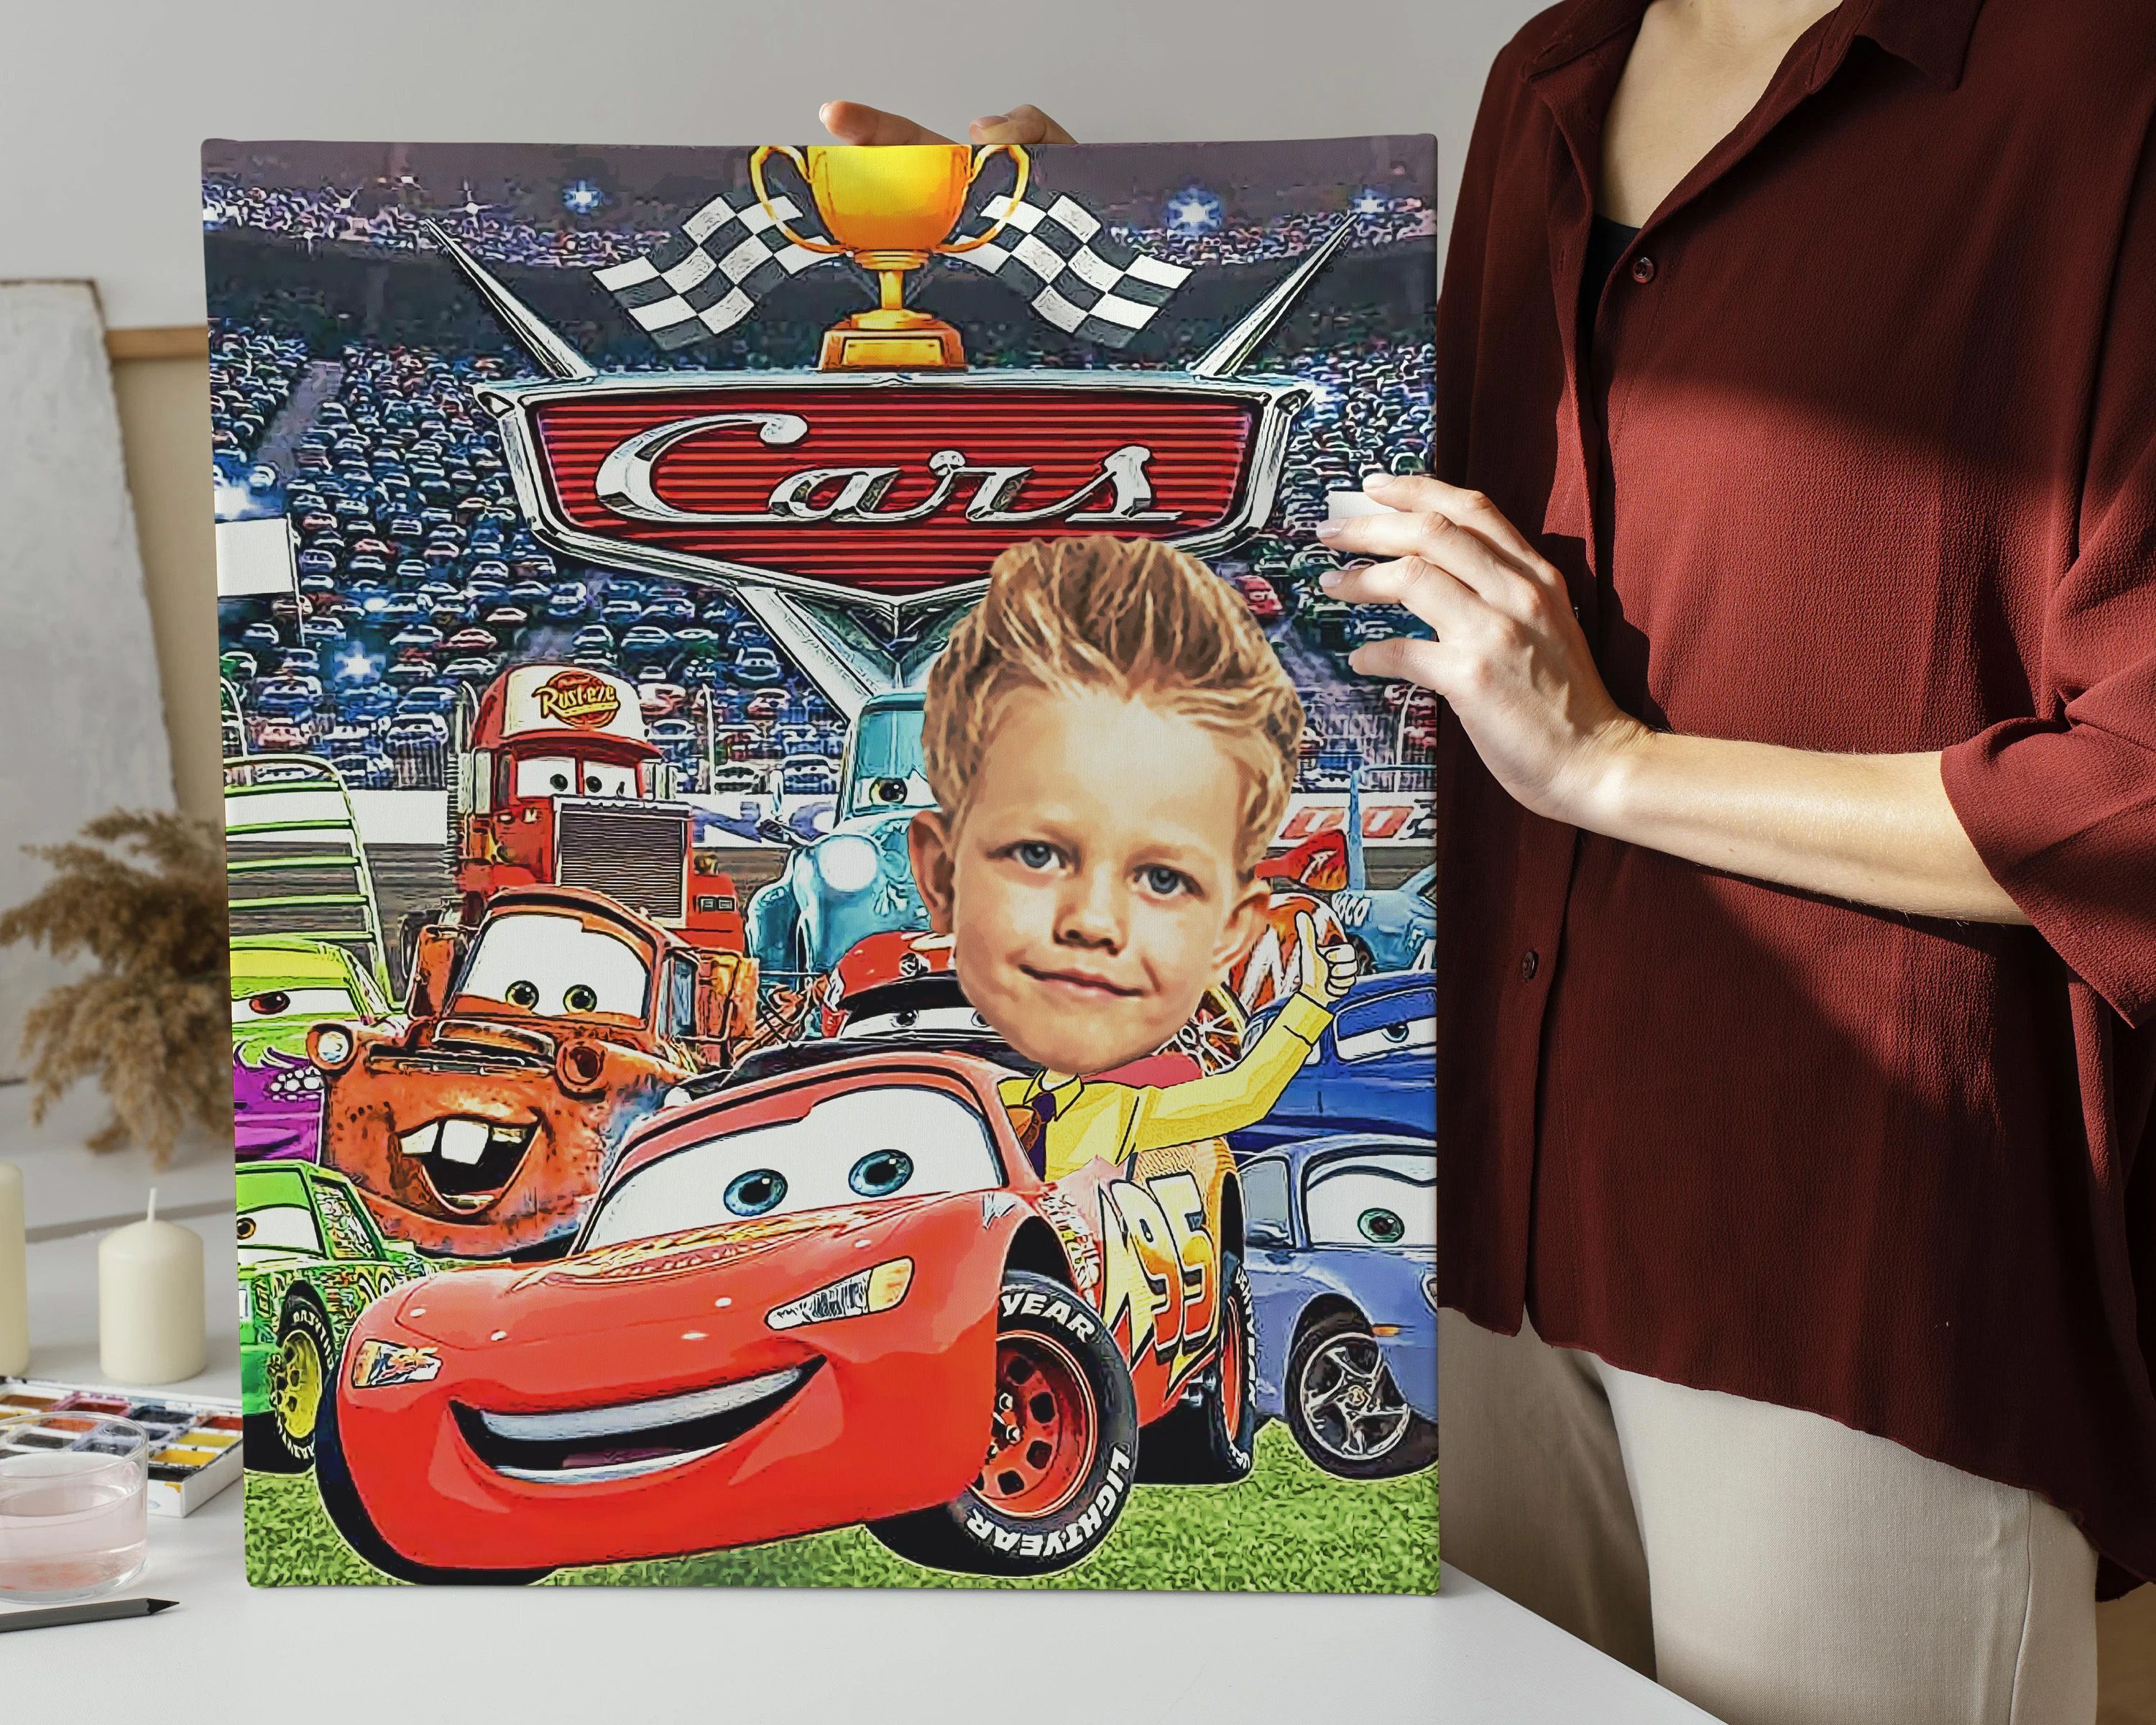 Cars mcqueen Custom Portrait, Get Your Own mcqueen Portrait from your photo, Digital File Only